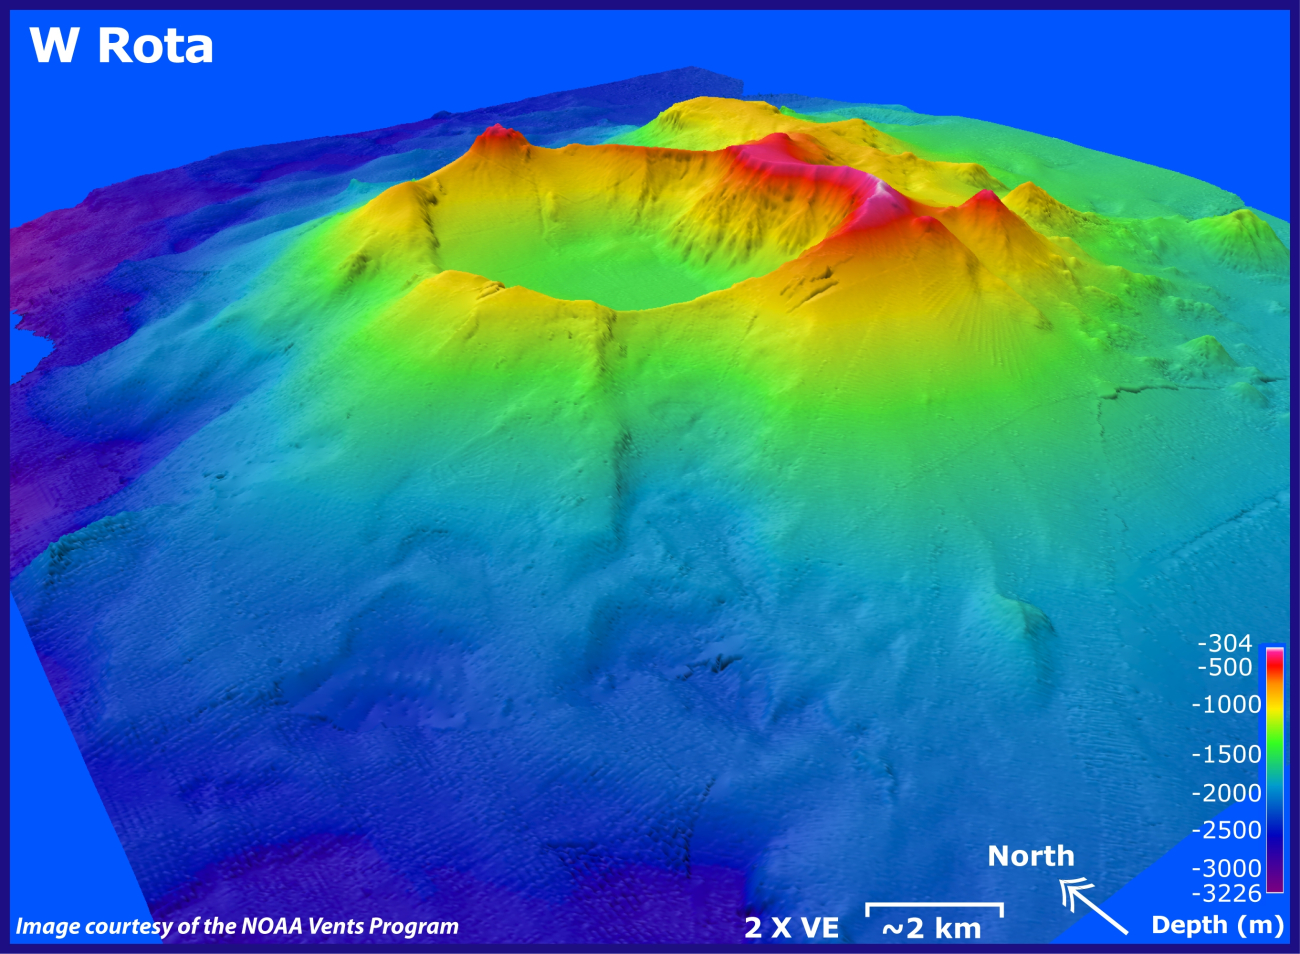 3-D view of West Rota Volcano